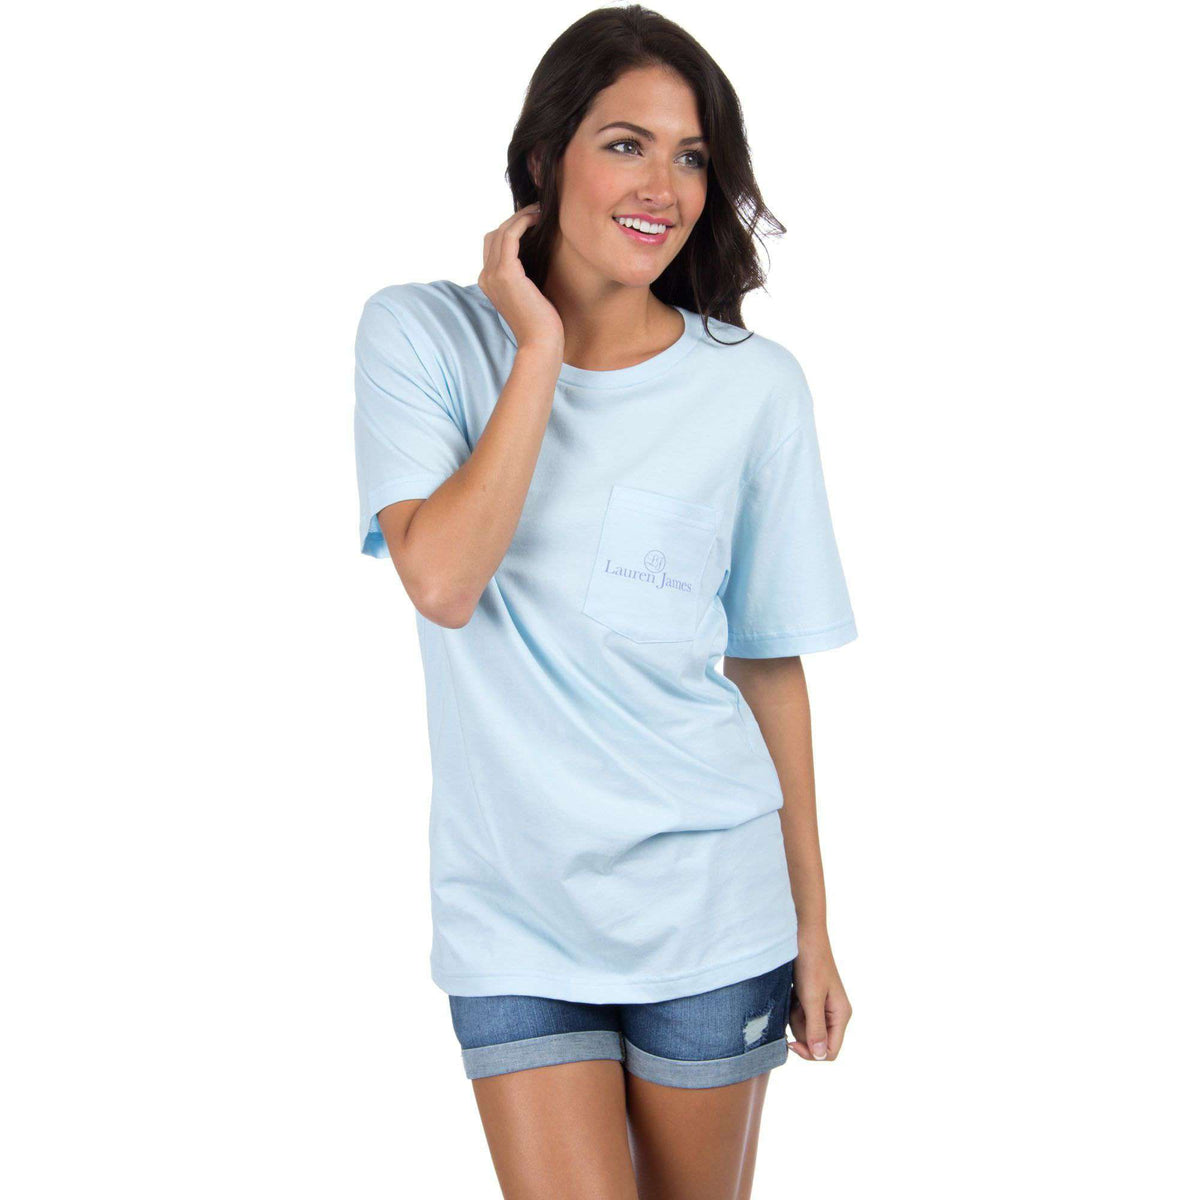 Coastal Squeeze Tee in Light Blue by Lauren James - Country Club Prep